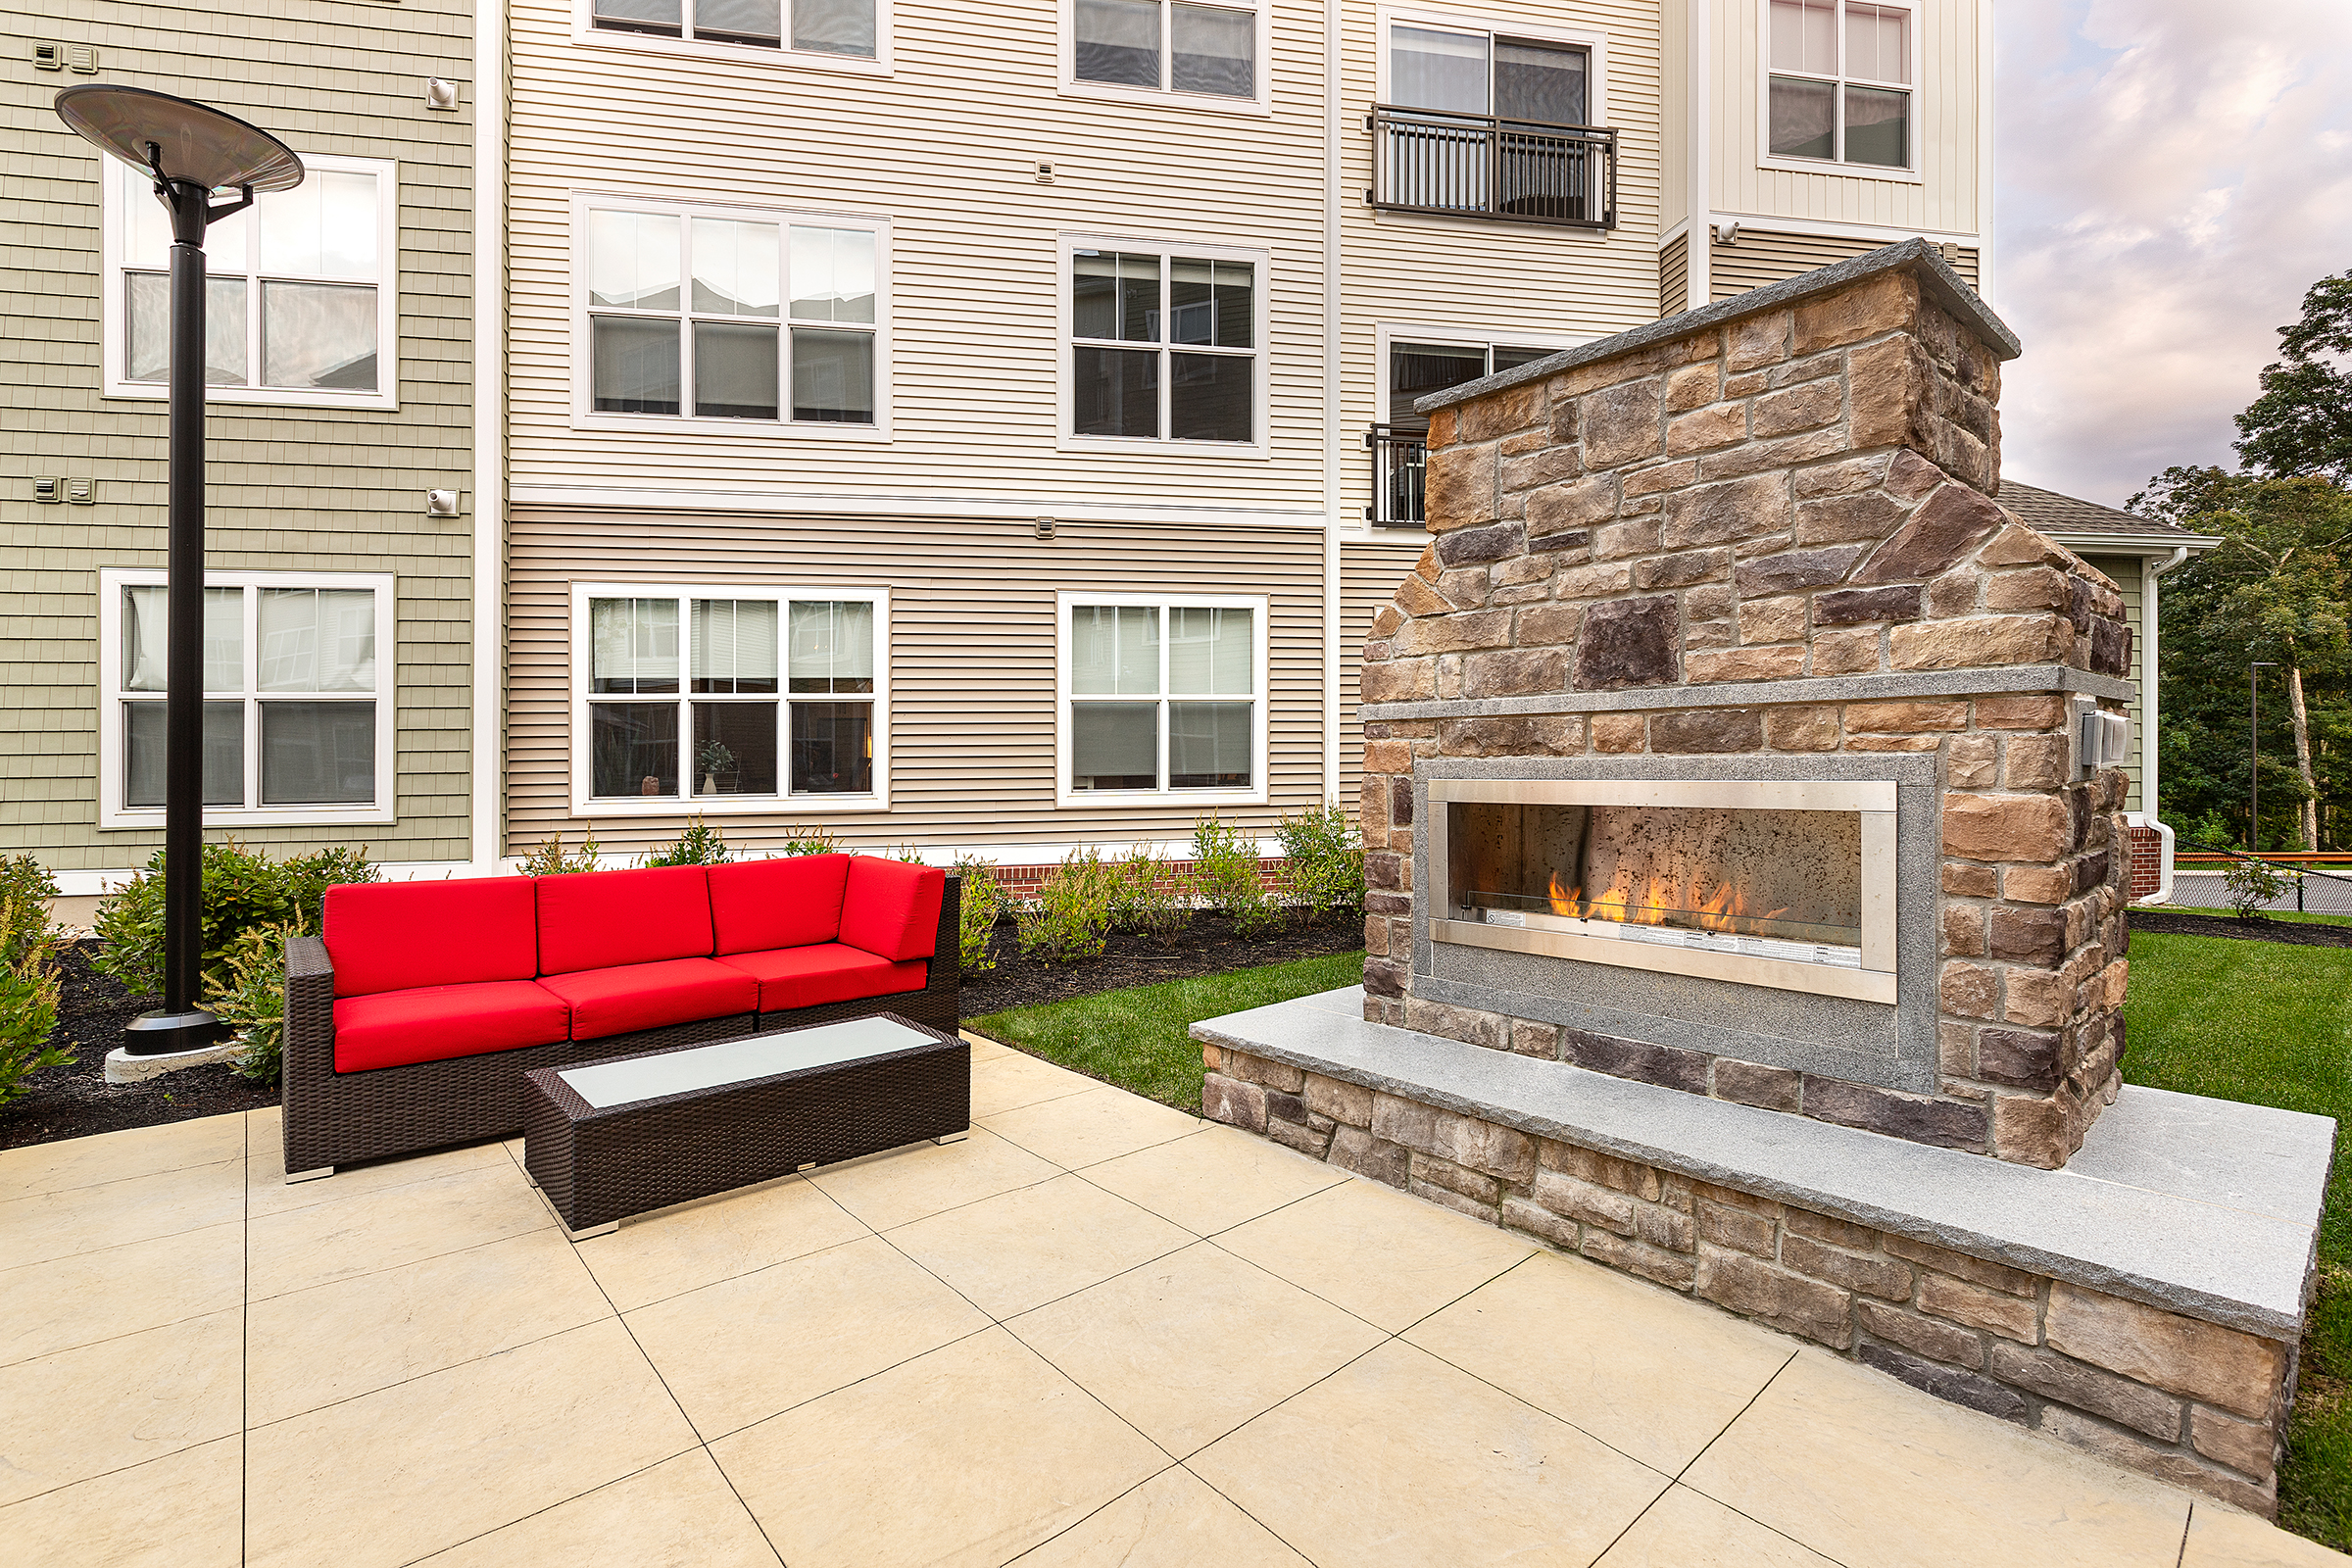 Patio with fireplace and seating.